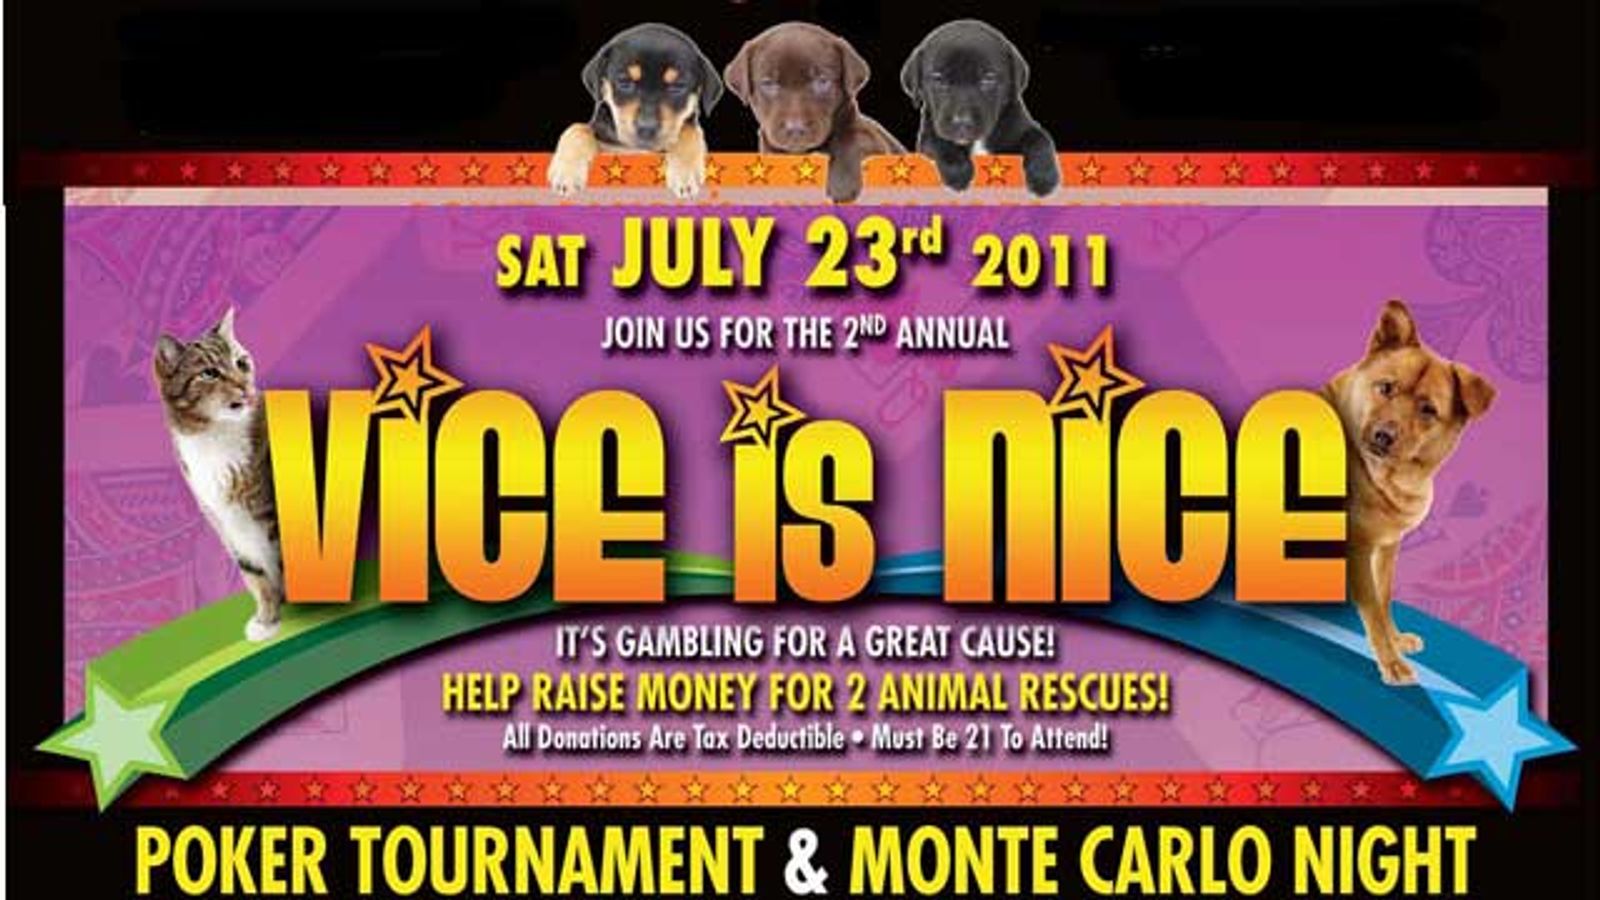 Vice IS Nice—And Animal Rescuers Will Benefit!